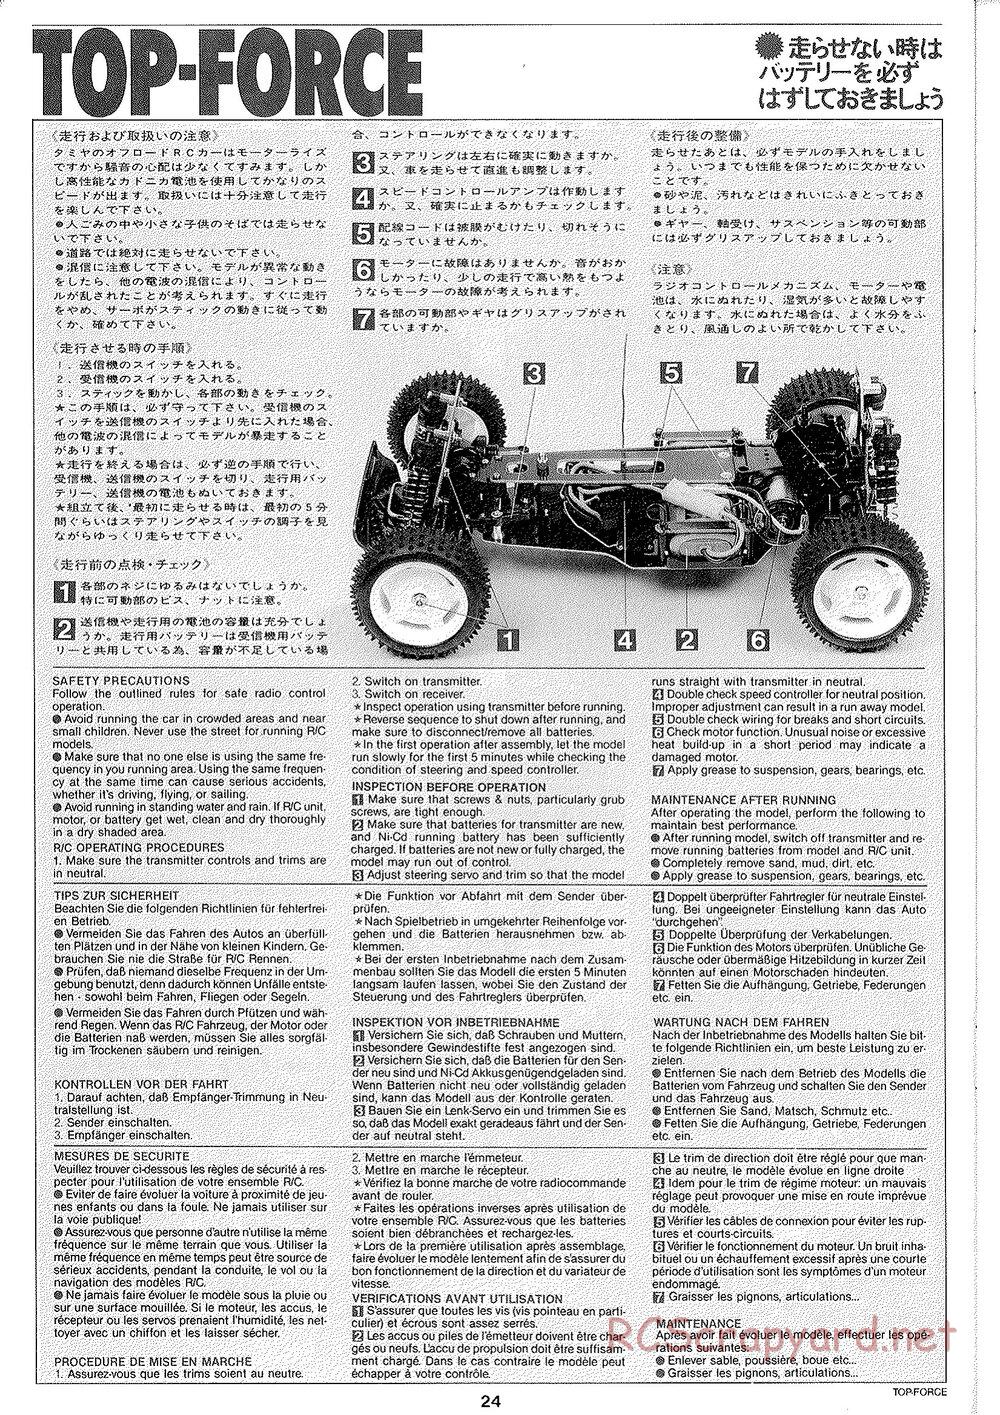 Tamiya - Top Force 2005 - DF-01 Chassis - Manual - Page 24